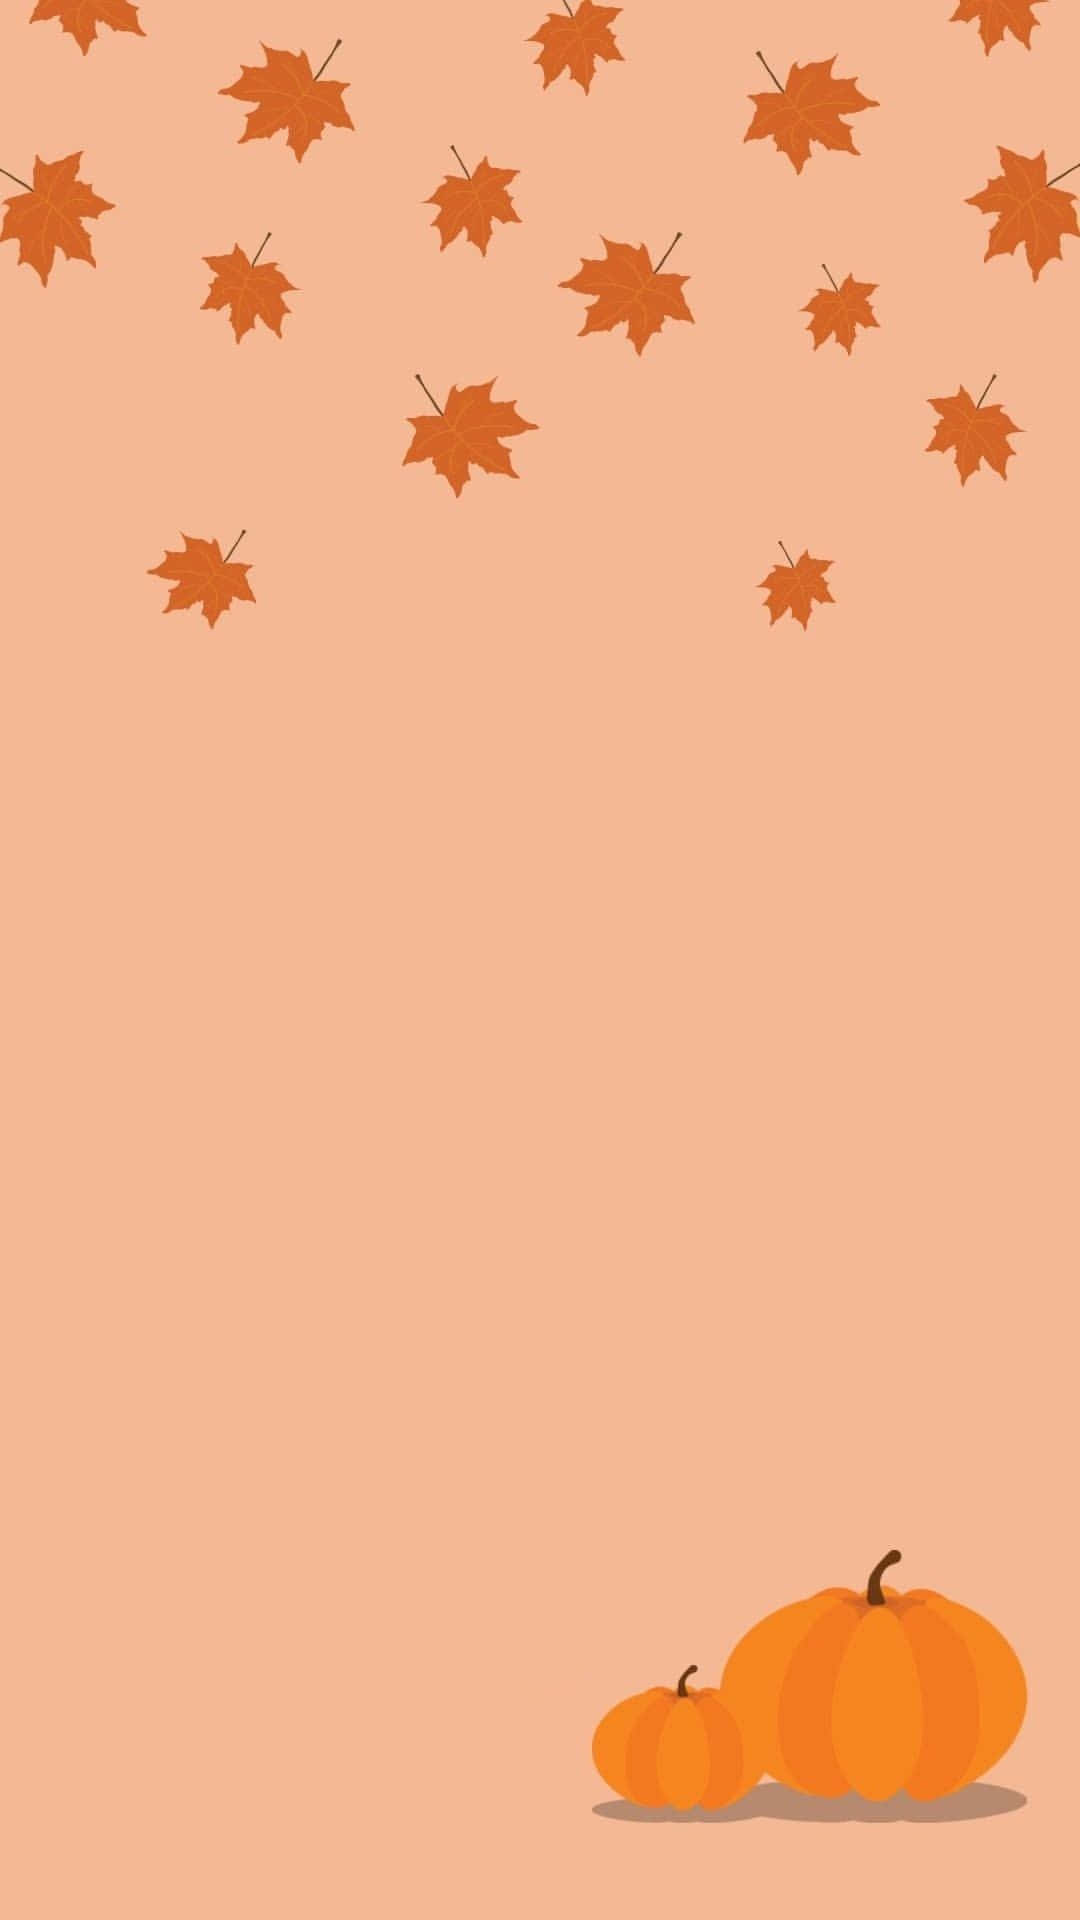 Cute Autumn iPhone Wallpapers - Wallpaper Cave